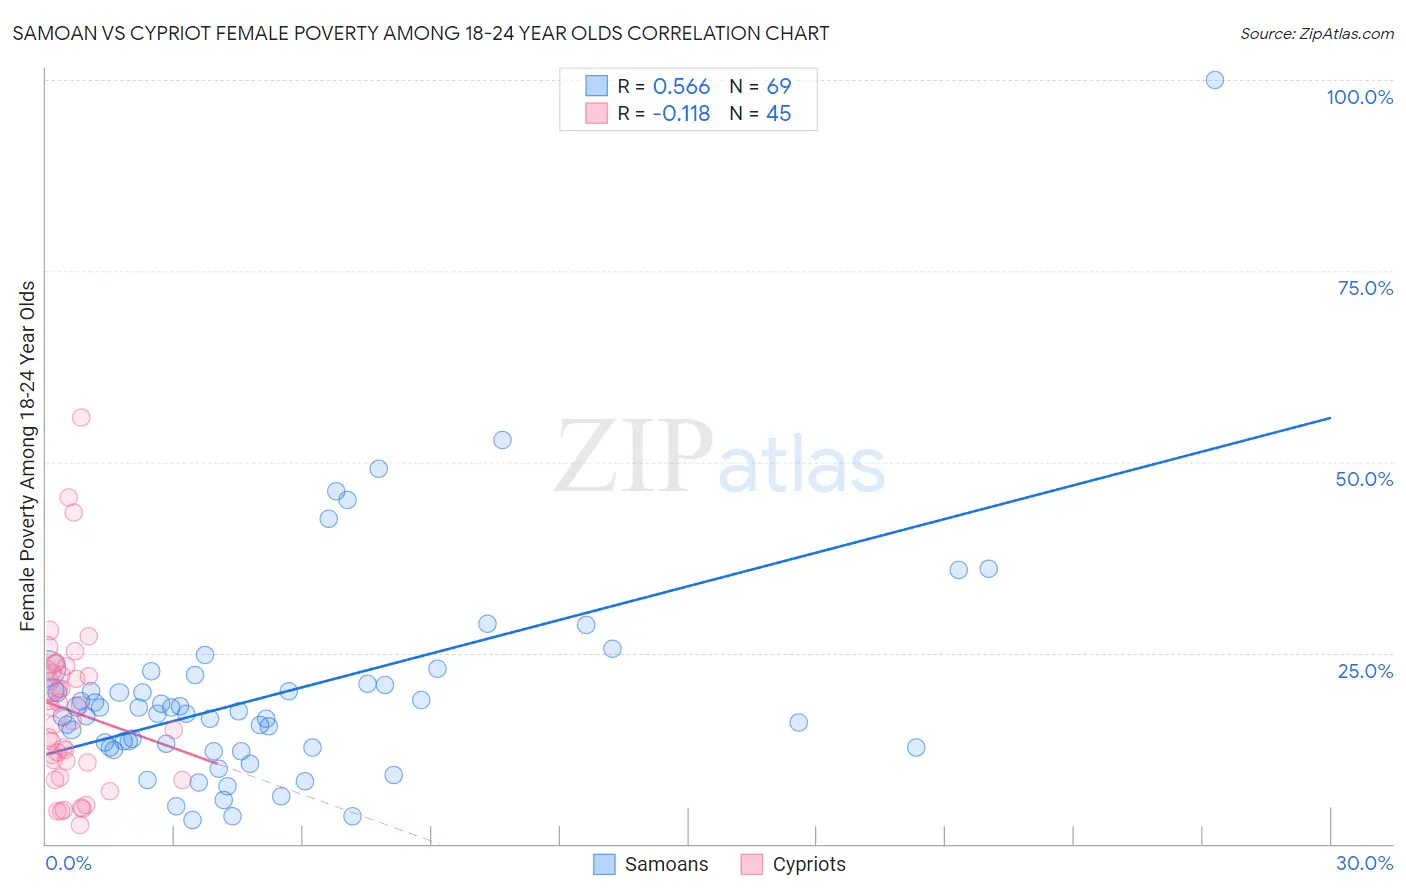 Samoan vs Cypriot Female Poverty Among 18-24 Year Olds